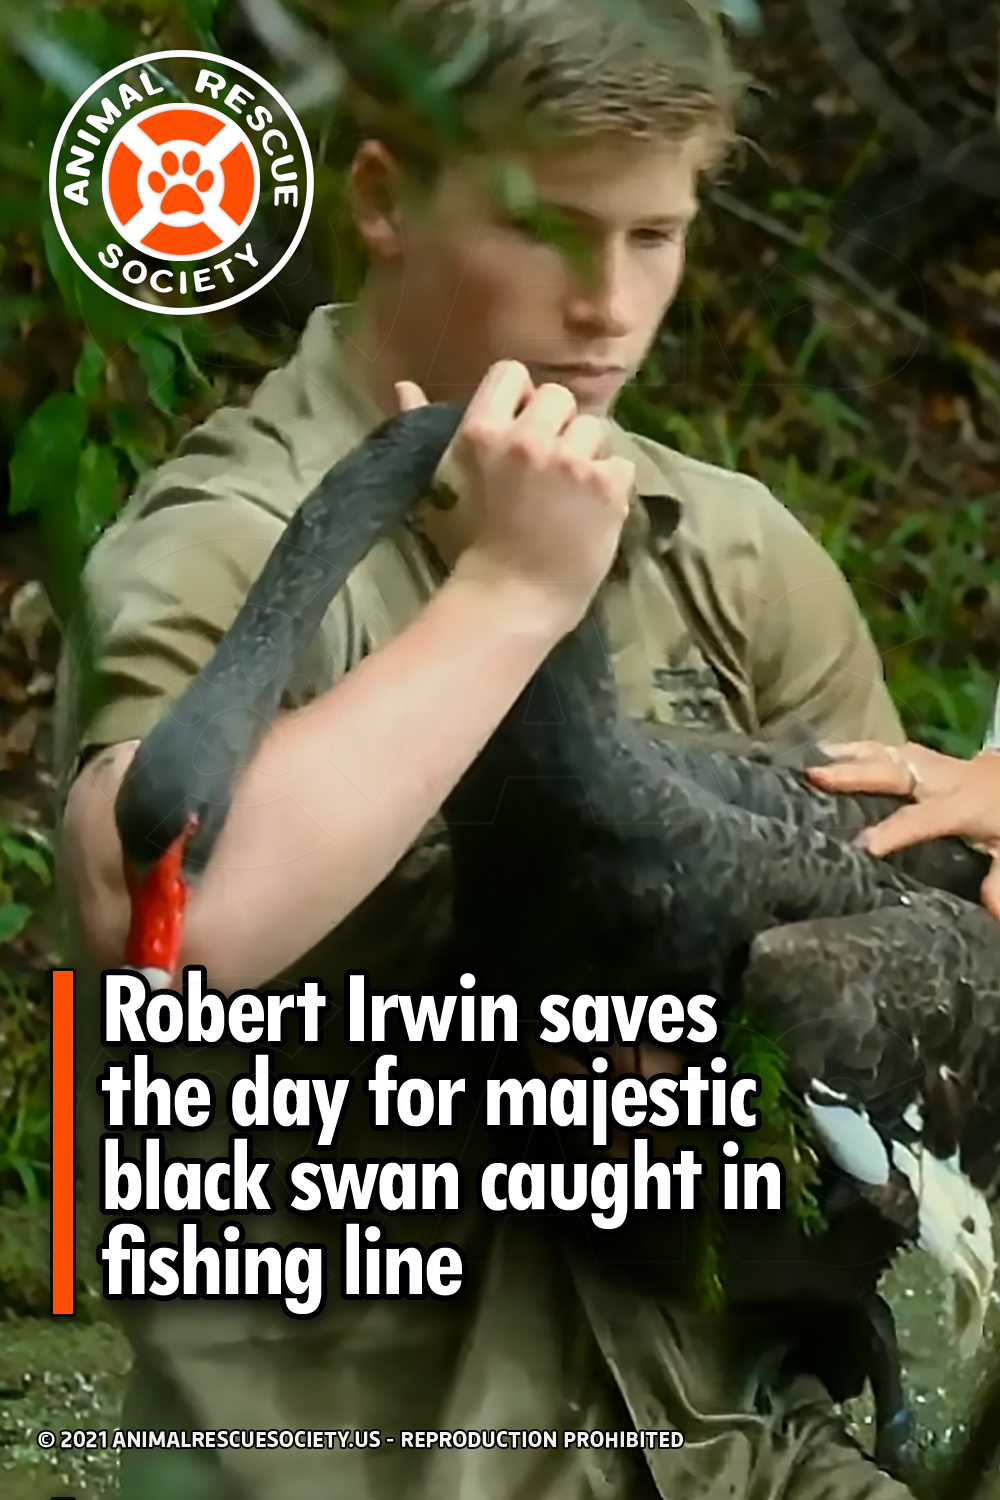 Robert Irwin saves the day for majestic black swan caught in fishing line